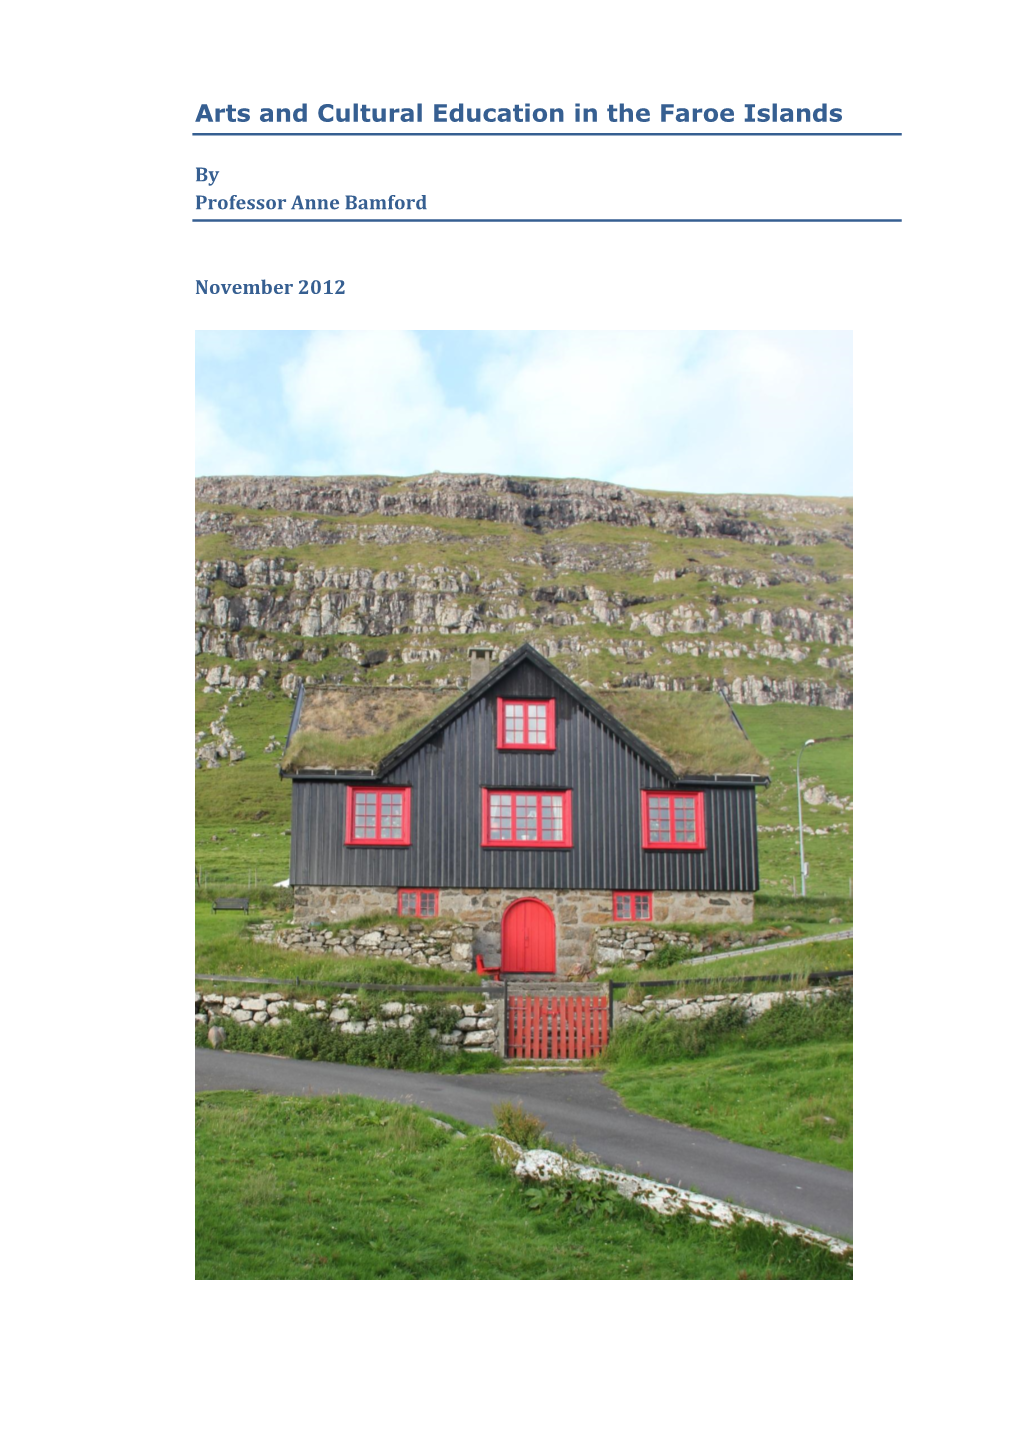 Arts and Cultural Education in the Faroe Islands